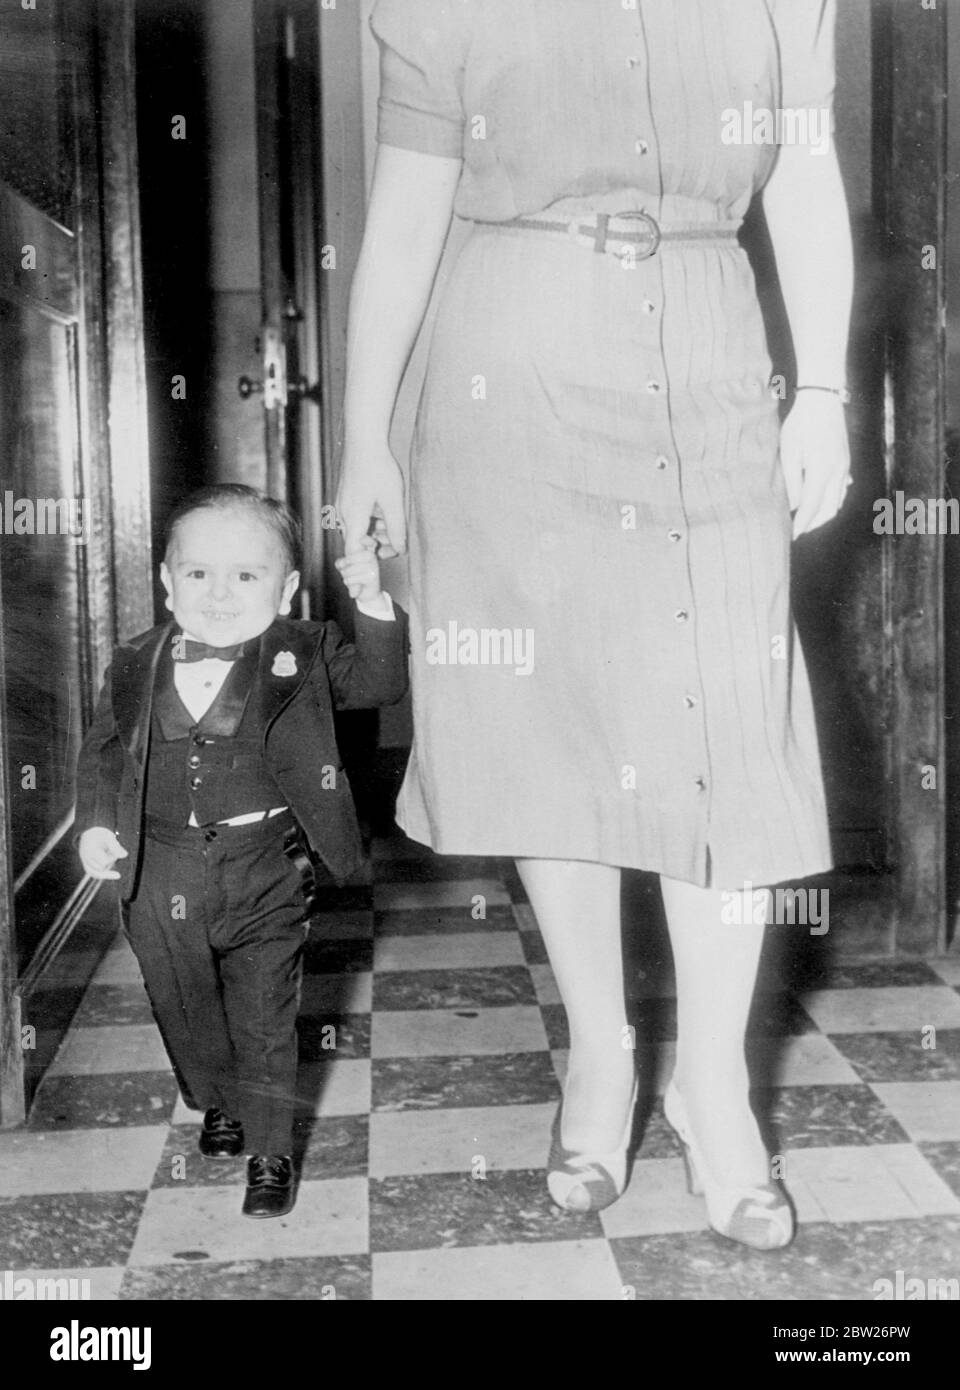 World's smallest man in New York. Paul de Rio, the world's smallest man, who is only 19 inches tall, is to be presented at the Million Dollar Pier in Atlantic City, New Jersey. Paul was born in Spain 18 years ago and only weighs twelve pounds. Photo shows, Paul de Rio makes a woman of normal stature appear a giantess as he walks with her at his New york Hotel. Stock Photo